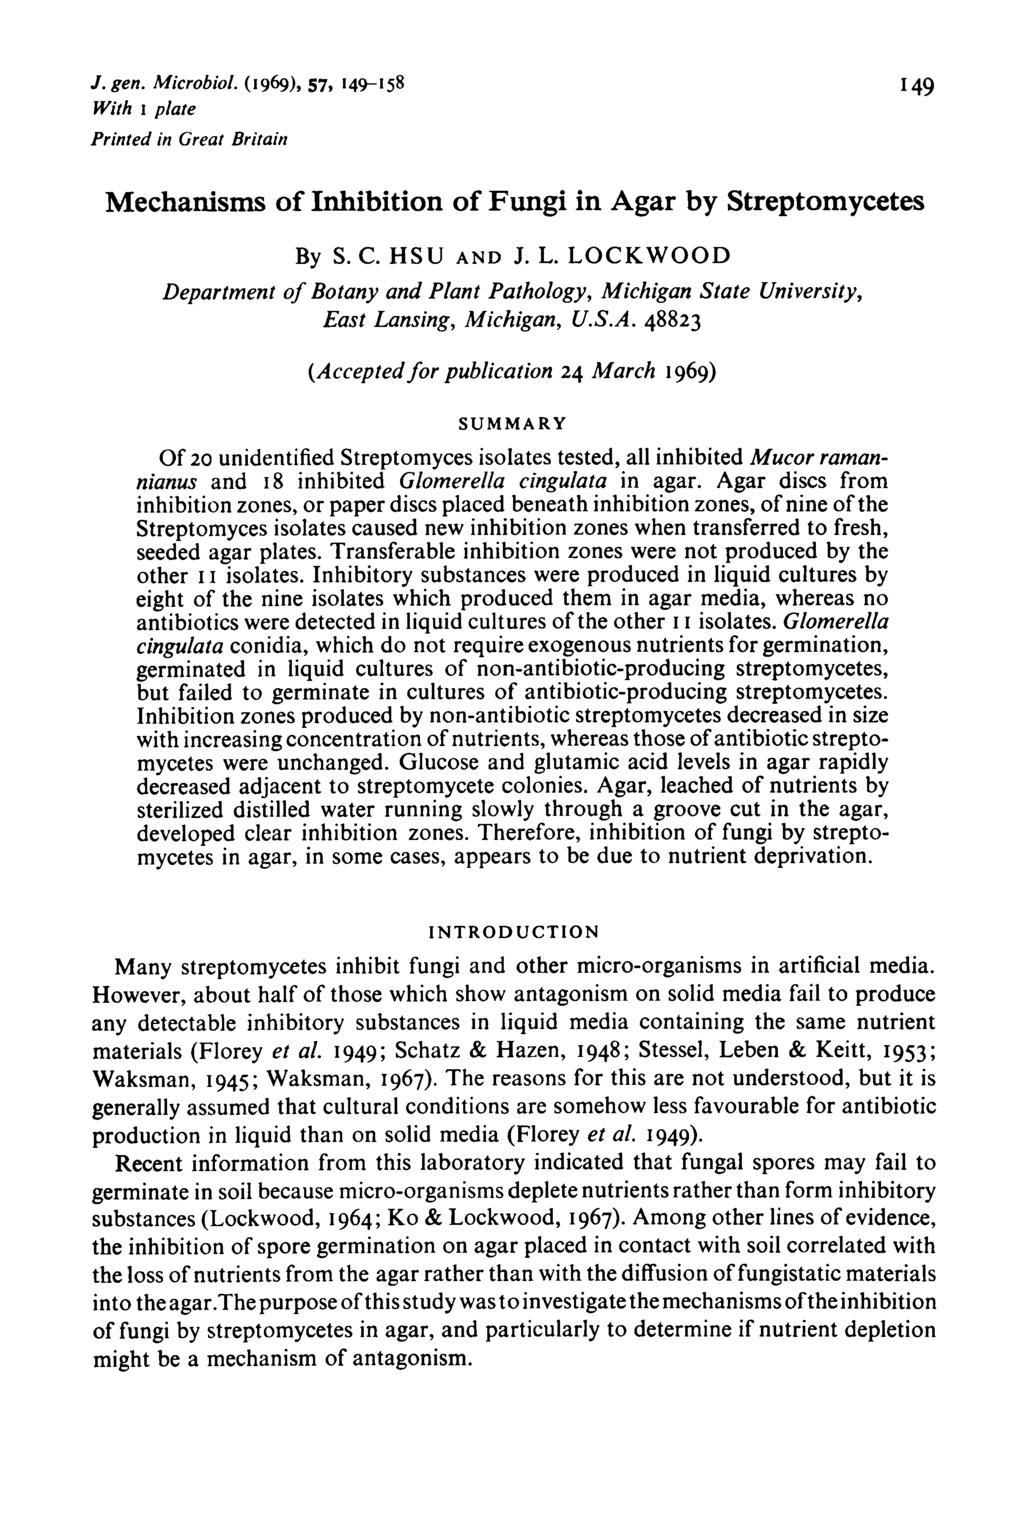 J. gen. Microbiol. (196g), 57, 19-8 With I plate Printed in Great Britain 1 9 Mechanisms of Inhibition of Fungi in Agar by Streptomycetes By s. c. HSU AND J. L.